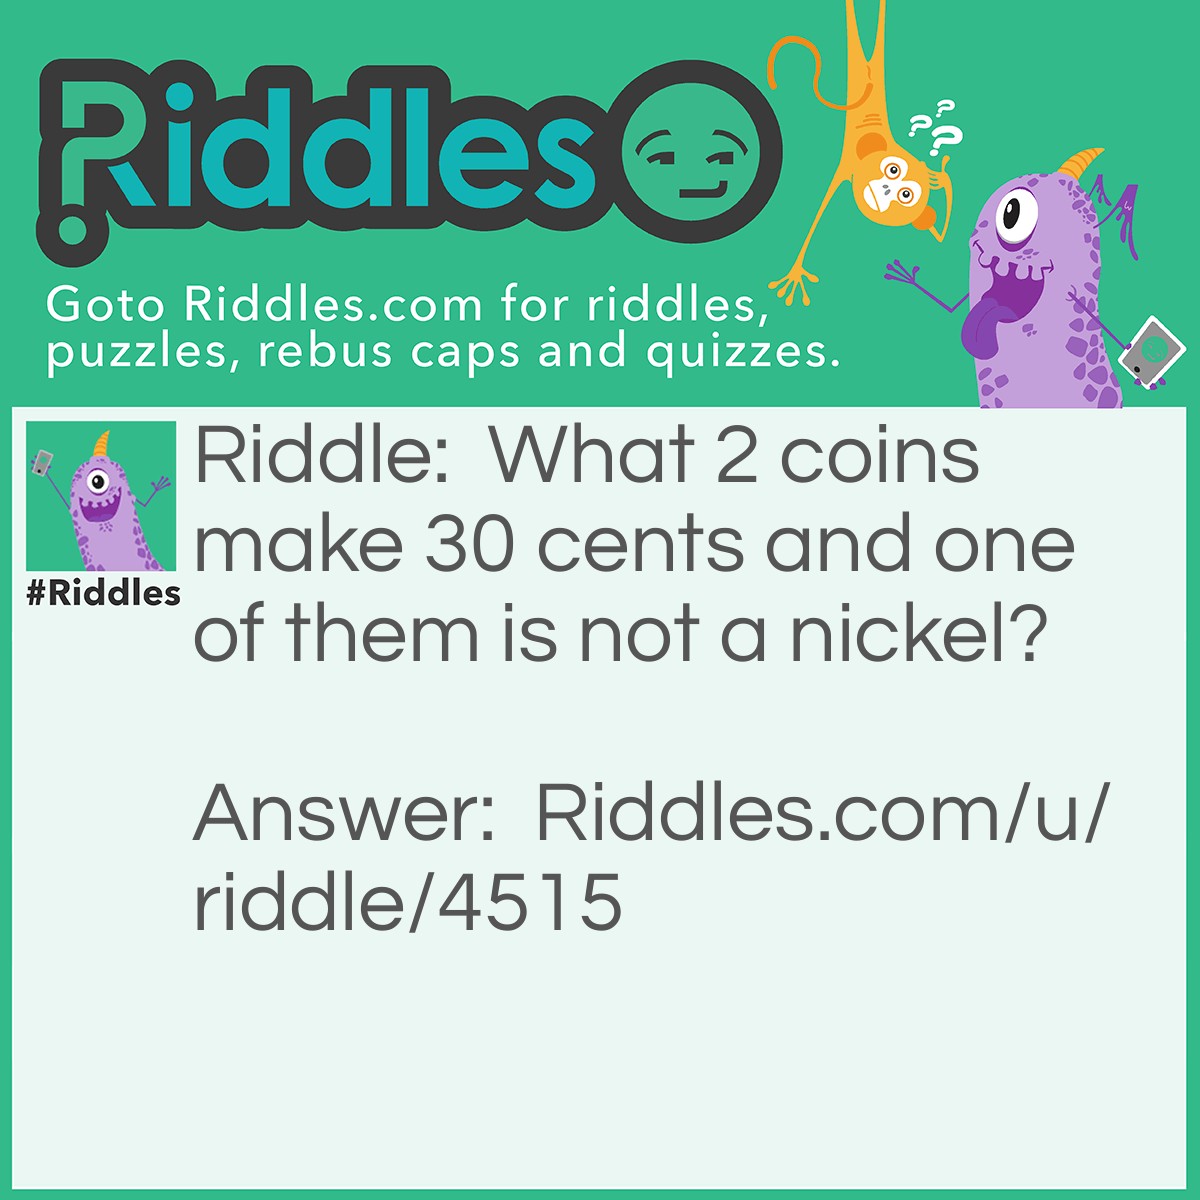 Riddle: What 2 coins make 30 cents and one of them is not a nickel? Answer: A Quarter and a nickel.